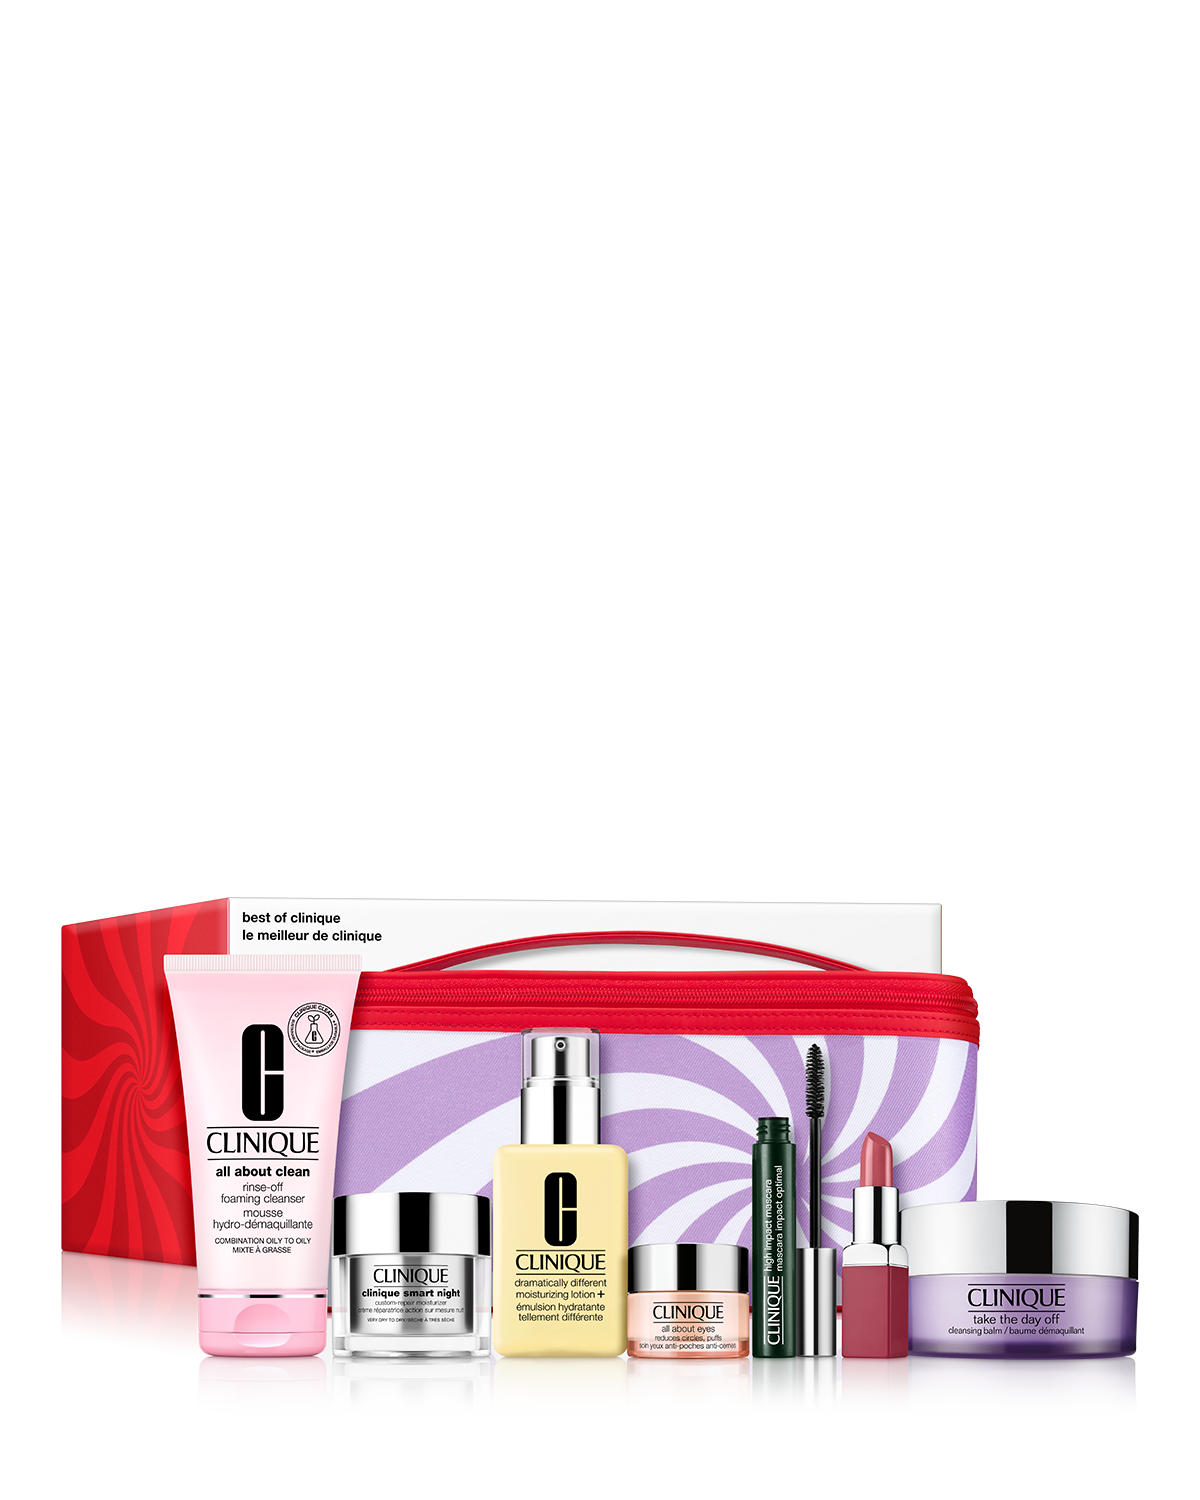 Best of Clinique: Skincare and Makeup Set